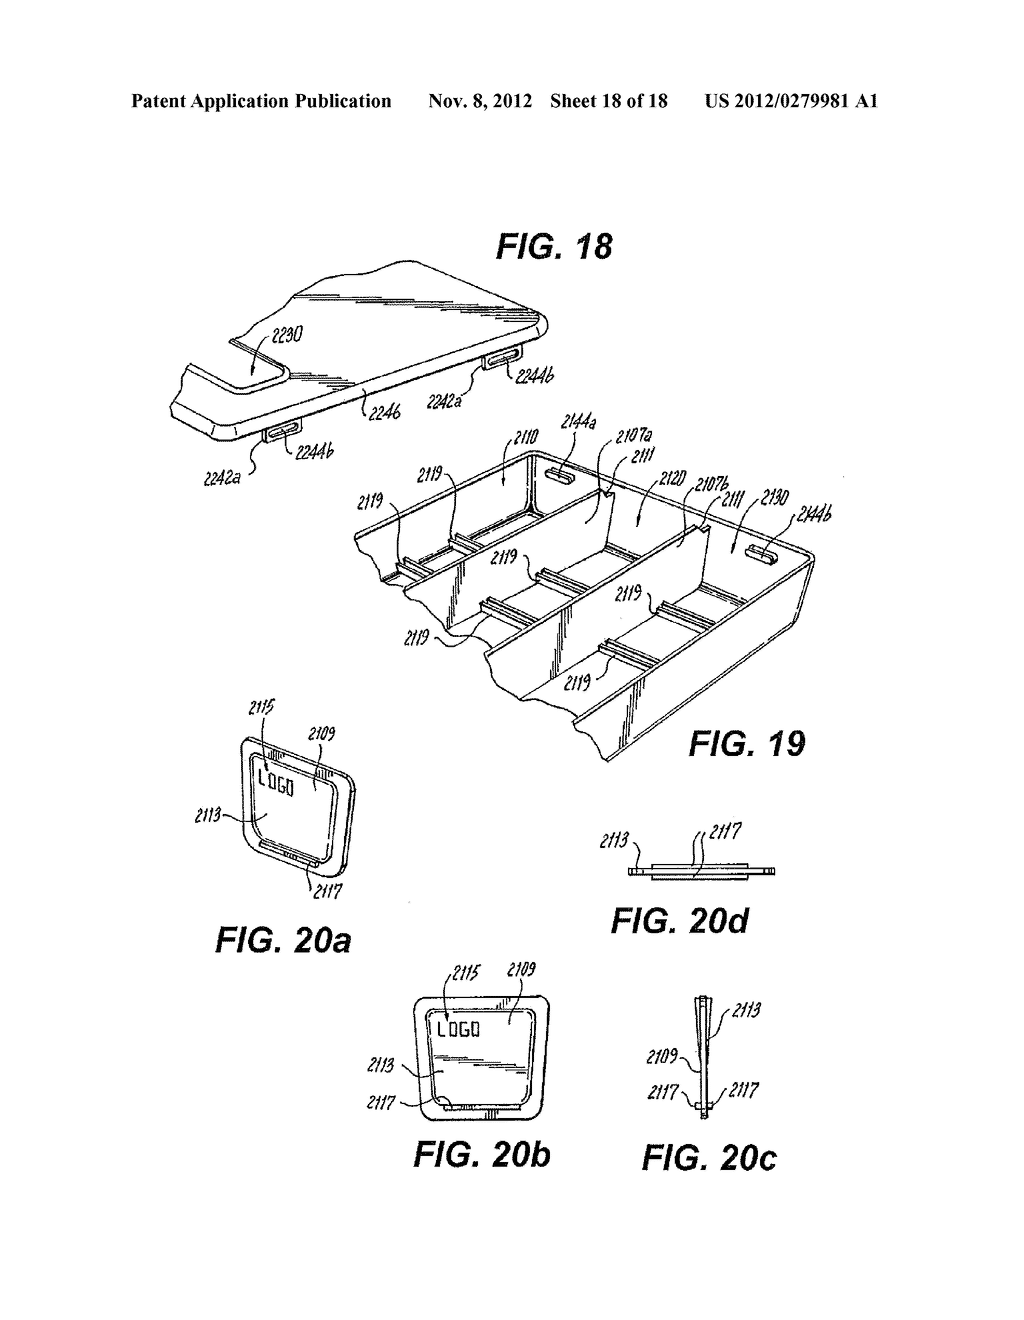 PROCESS FOR STORING AND RETRIEVING ROLLED FLEXIBLE BAGS FROM A     DISPENSERPROCESS FOR STORING AND RETRIEVING ROLLED FLEXIBLE BAGS FROM A     DISPENSER - diagram, schematic, and image 19